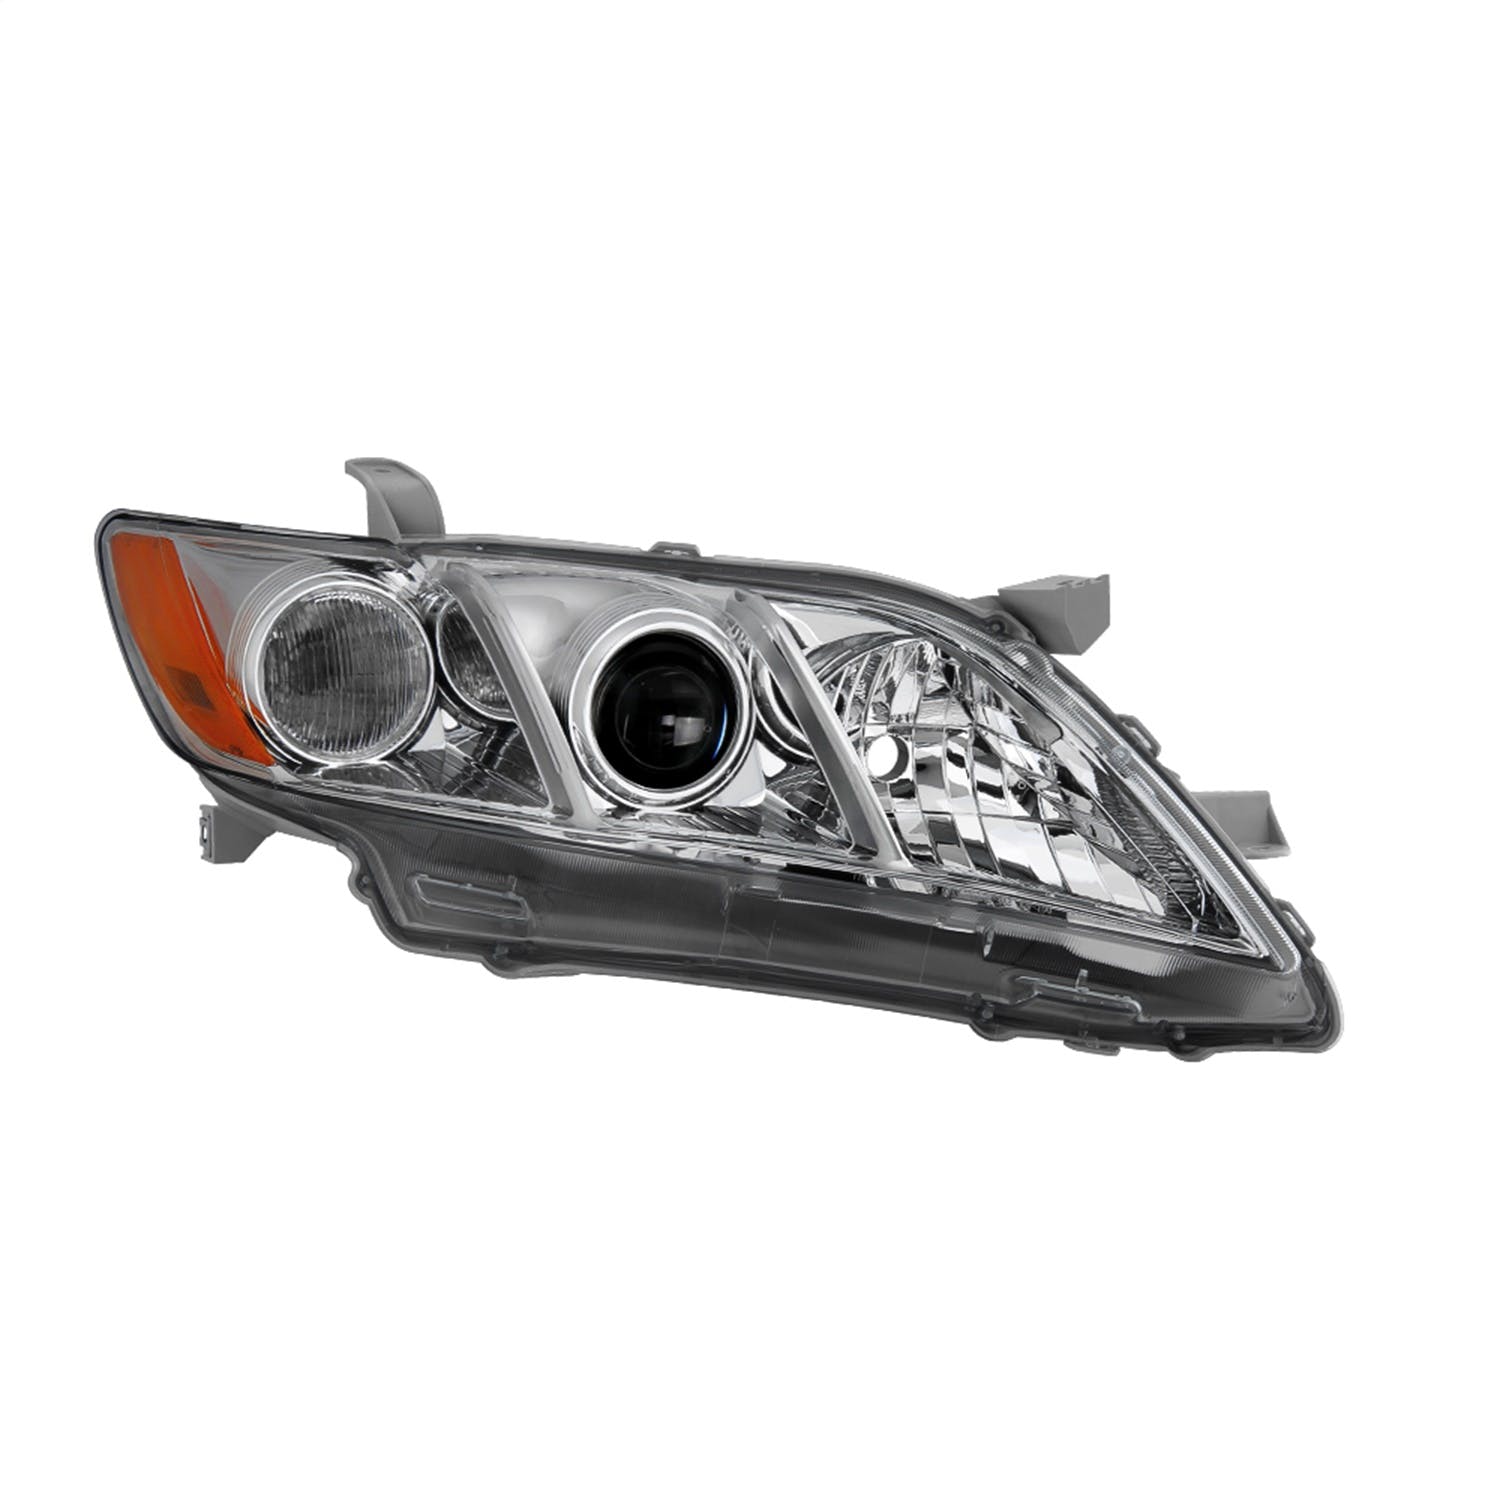 XTUNE POWER 9943218 Toyota Camry 07 09 ( US Built Models Only Not Fit Hybrid ) Passenger Side headlights Low Beam H11(Not Included) ; High Beam HB3(Not Included) ; Signal 3457NA(Not Included) OE Right